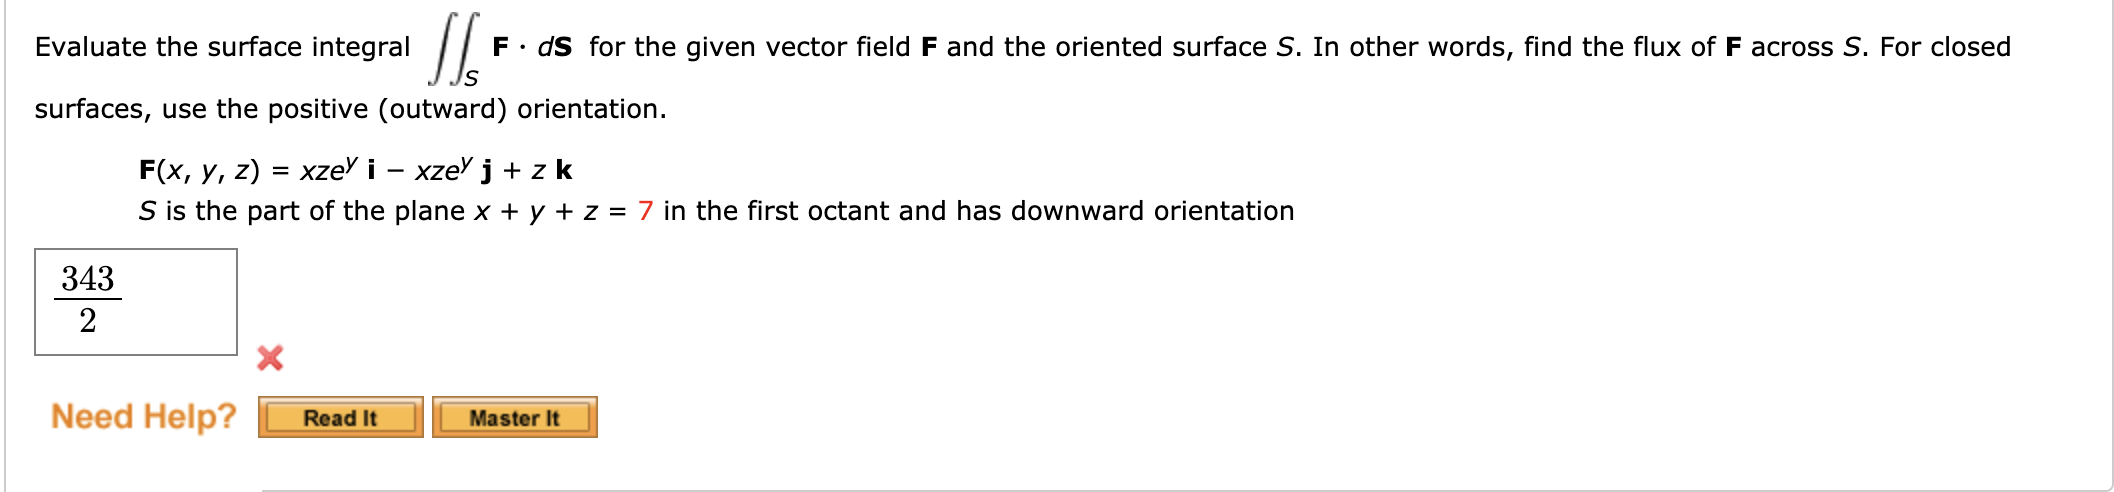 Solved Evaluate The Surface Integral Sle Fºds For The Given 2953